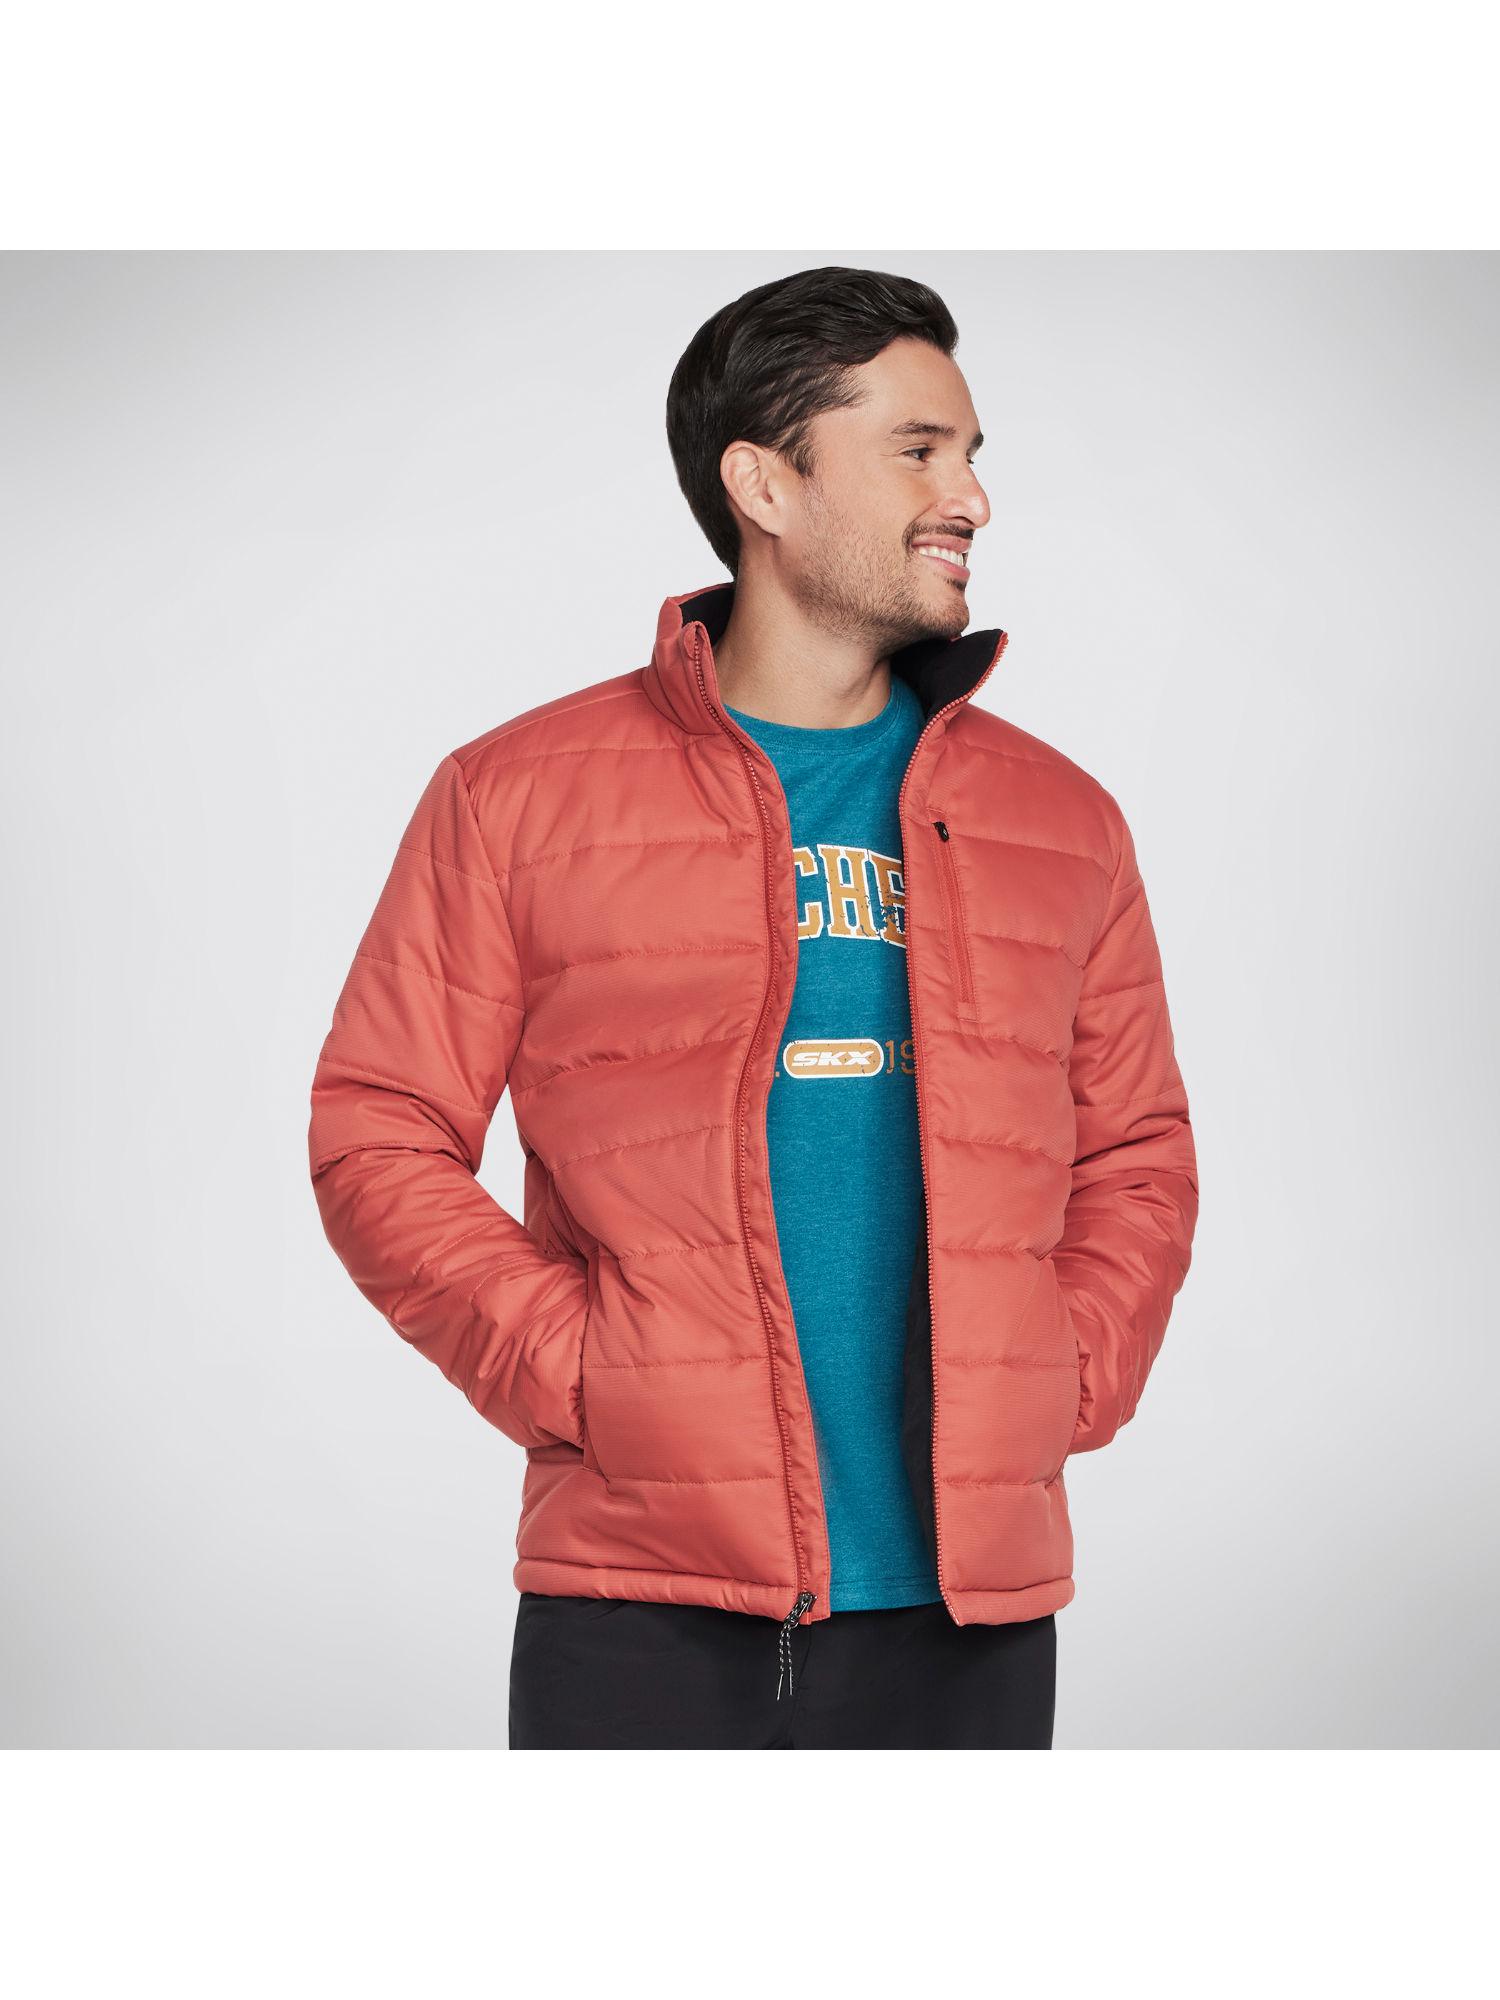 go-shield-puffer-jacket-red